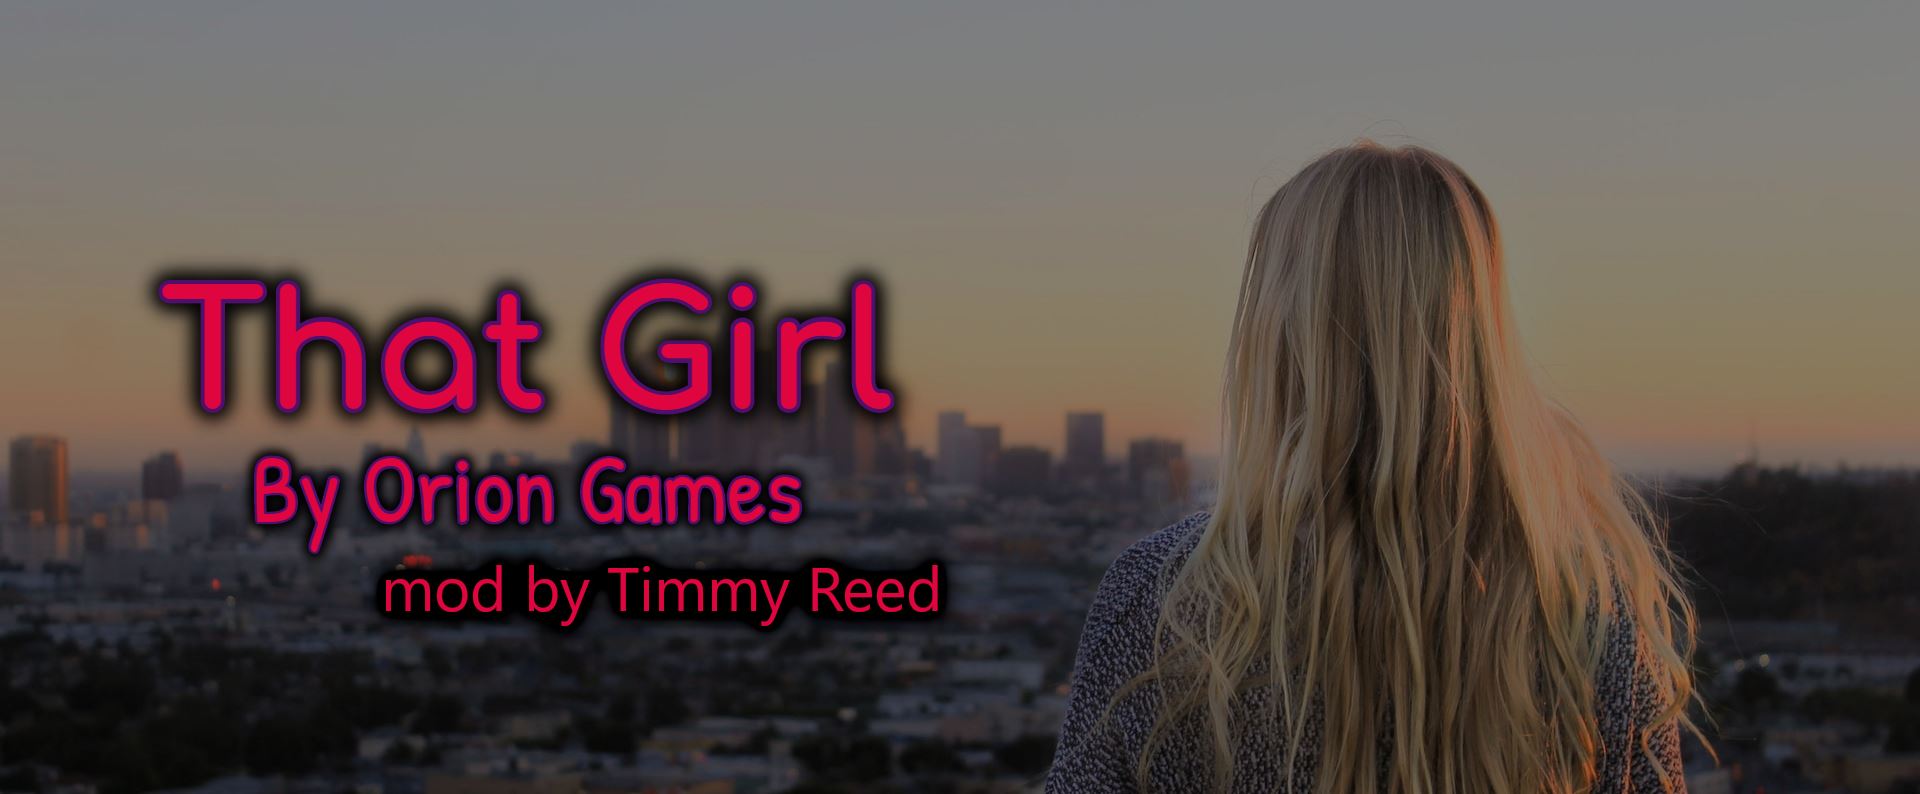 That Girl Fan Remake porn xxx game download cover